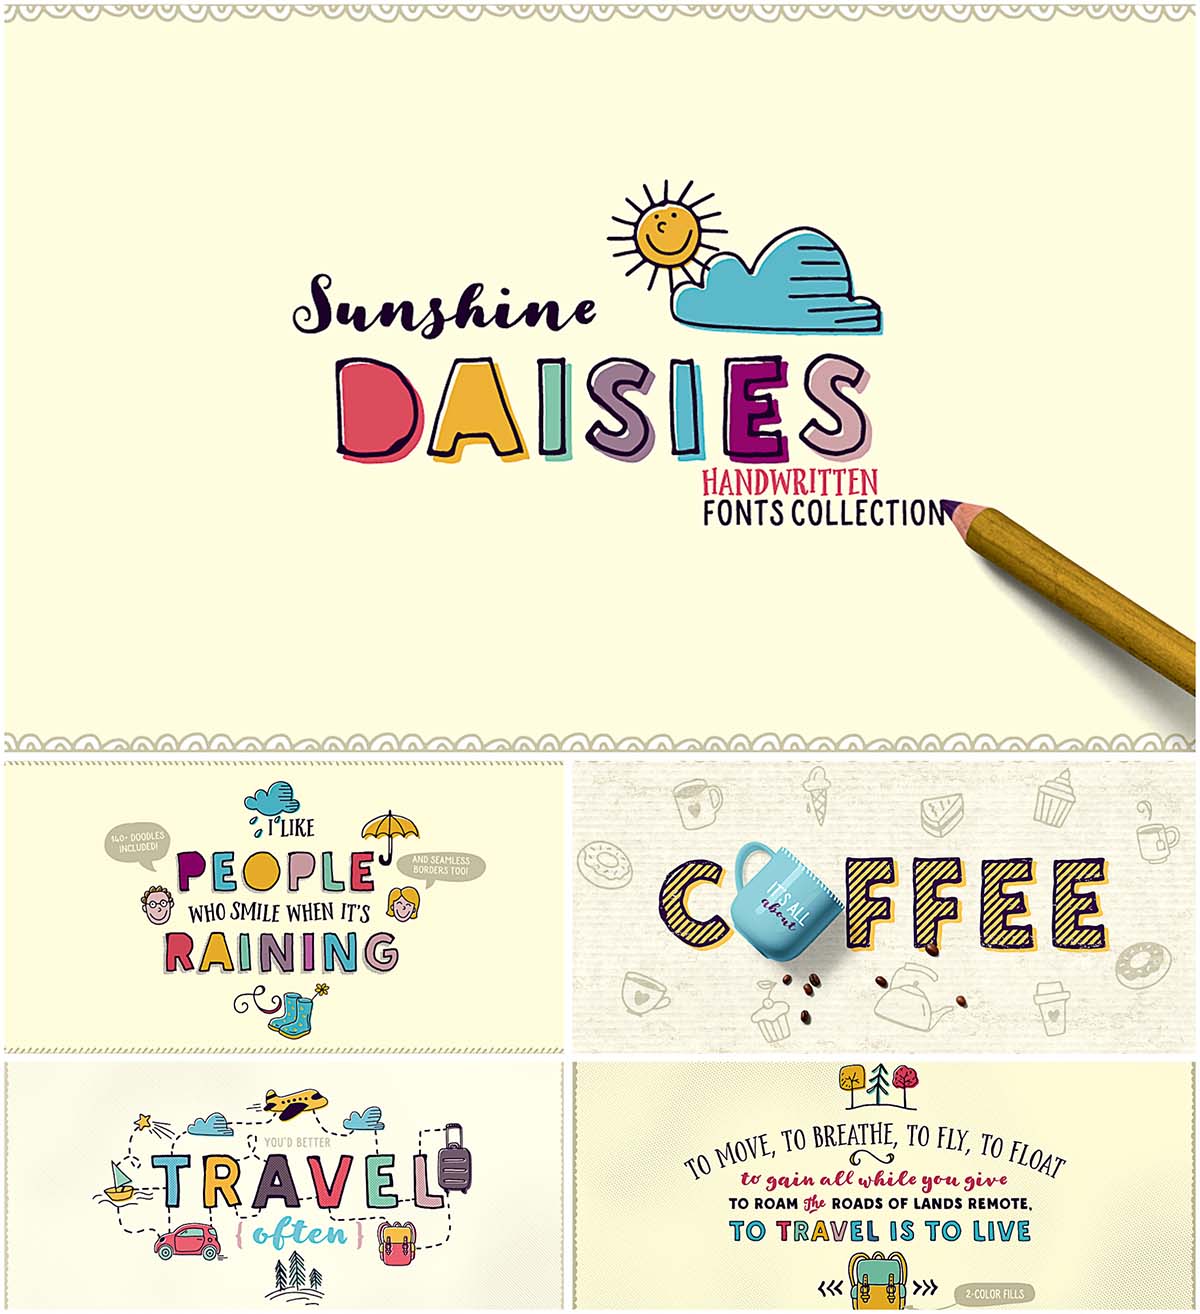 Sunshine daisies font collection